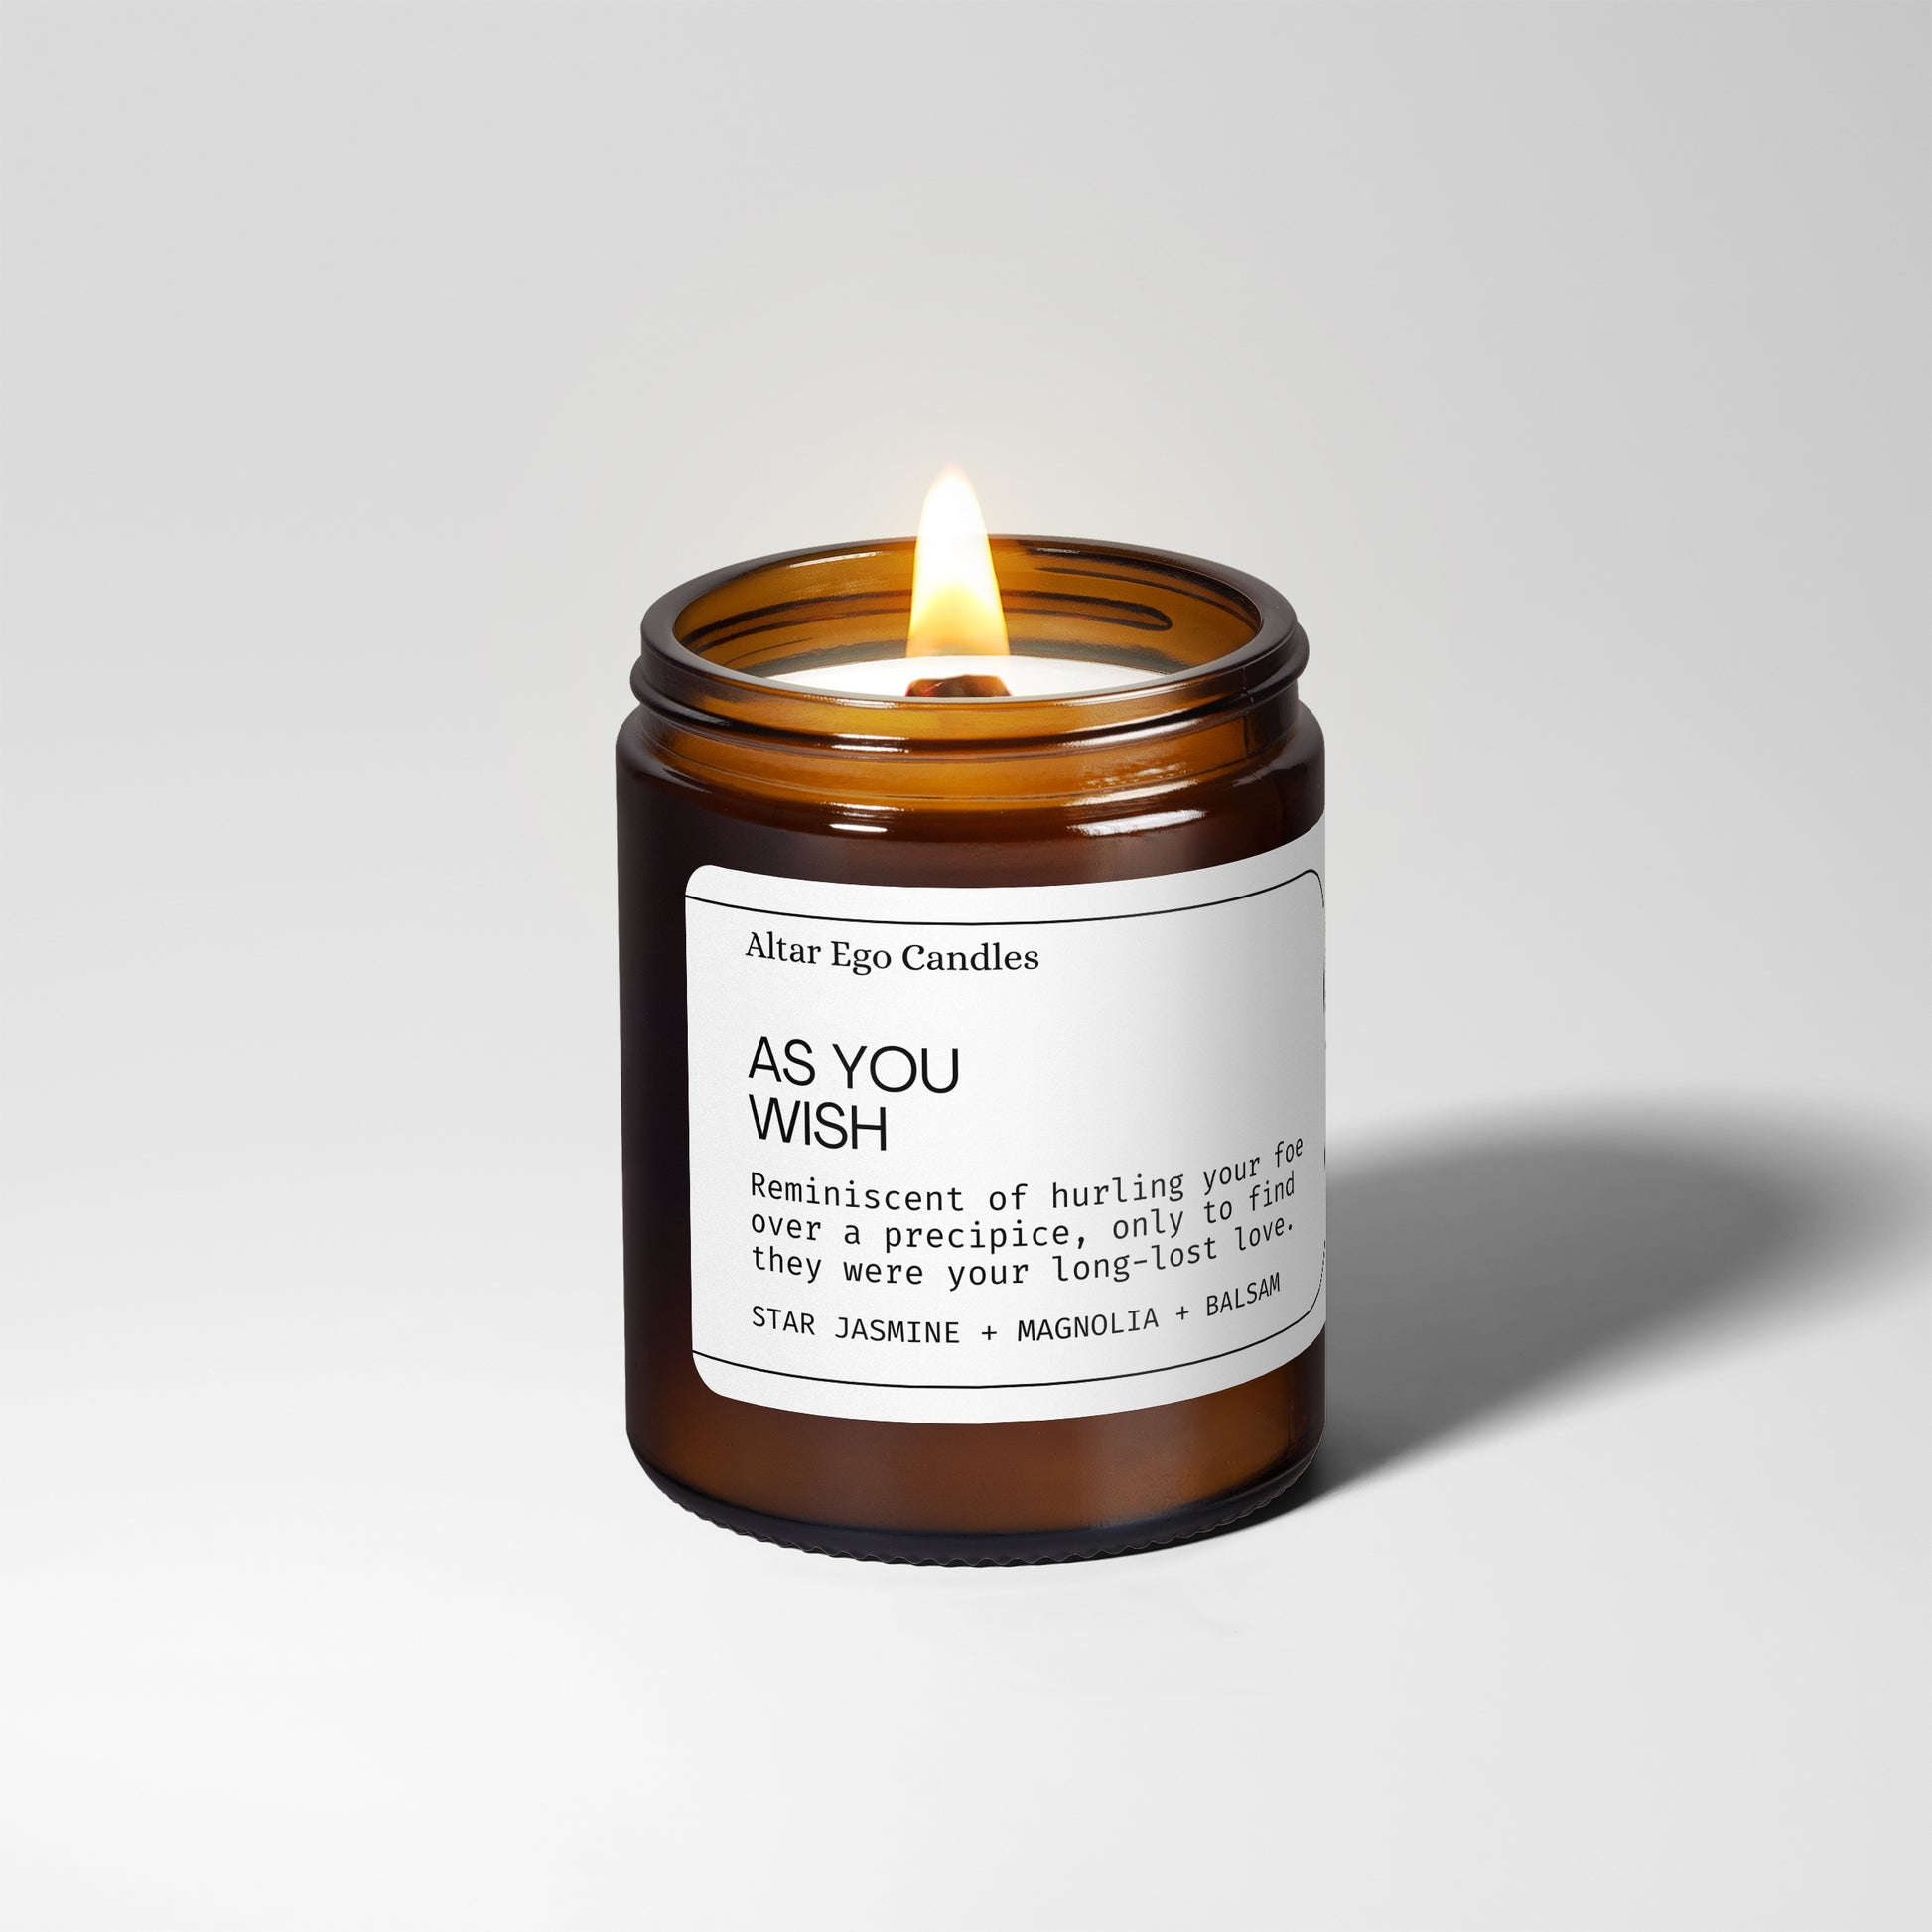 wood wick soy candle with  star jasmine, magnolia, white lily, and balsam  lit